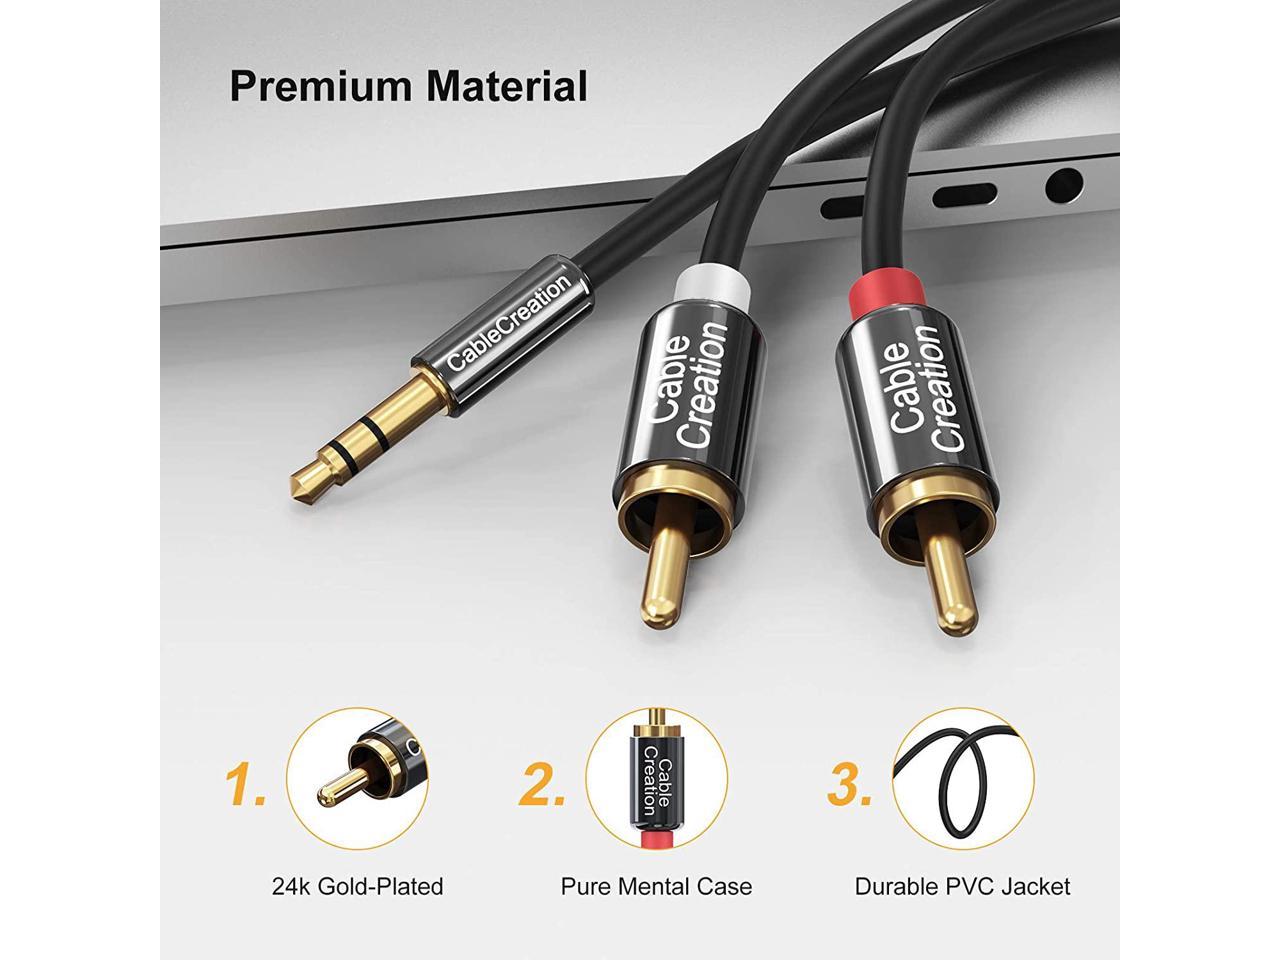 HDTV Home Theater Speakers MP3 3M 3.5mm to RCA Cable 10FT Tablets CableCreation Angle 3.5mm Male to 2RCA Male Auxiliary Stereo Audio Y Splitter Gold-Plated for Smartphones 